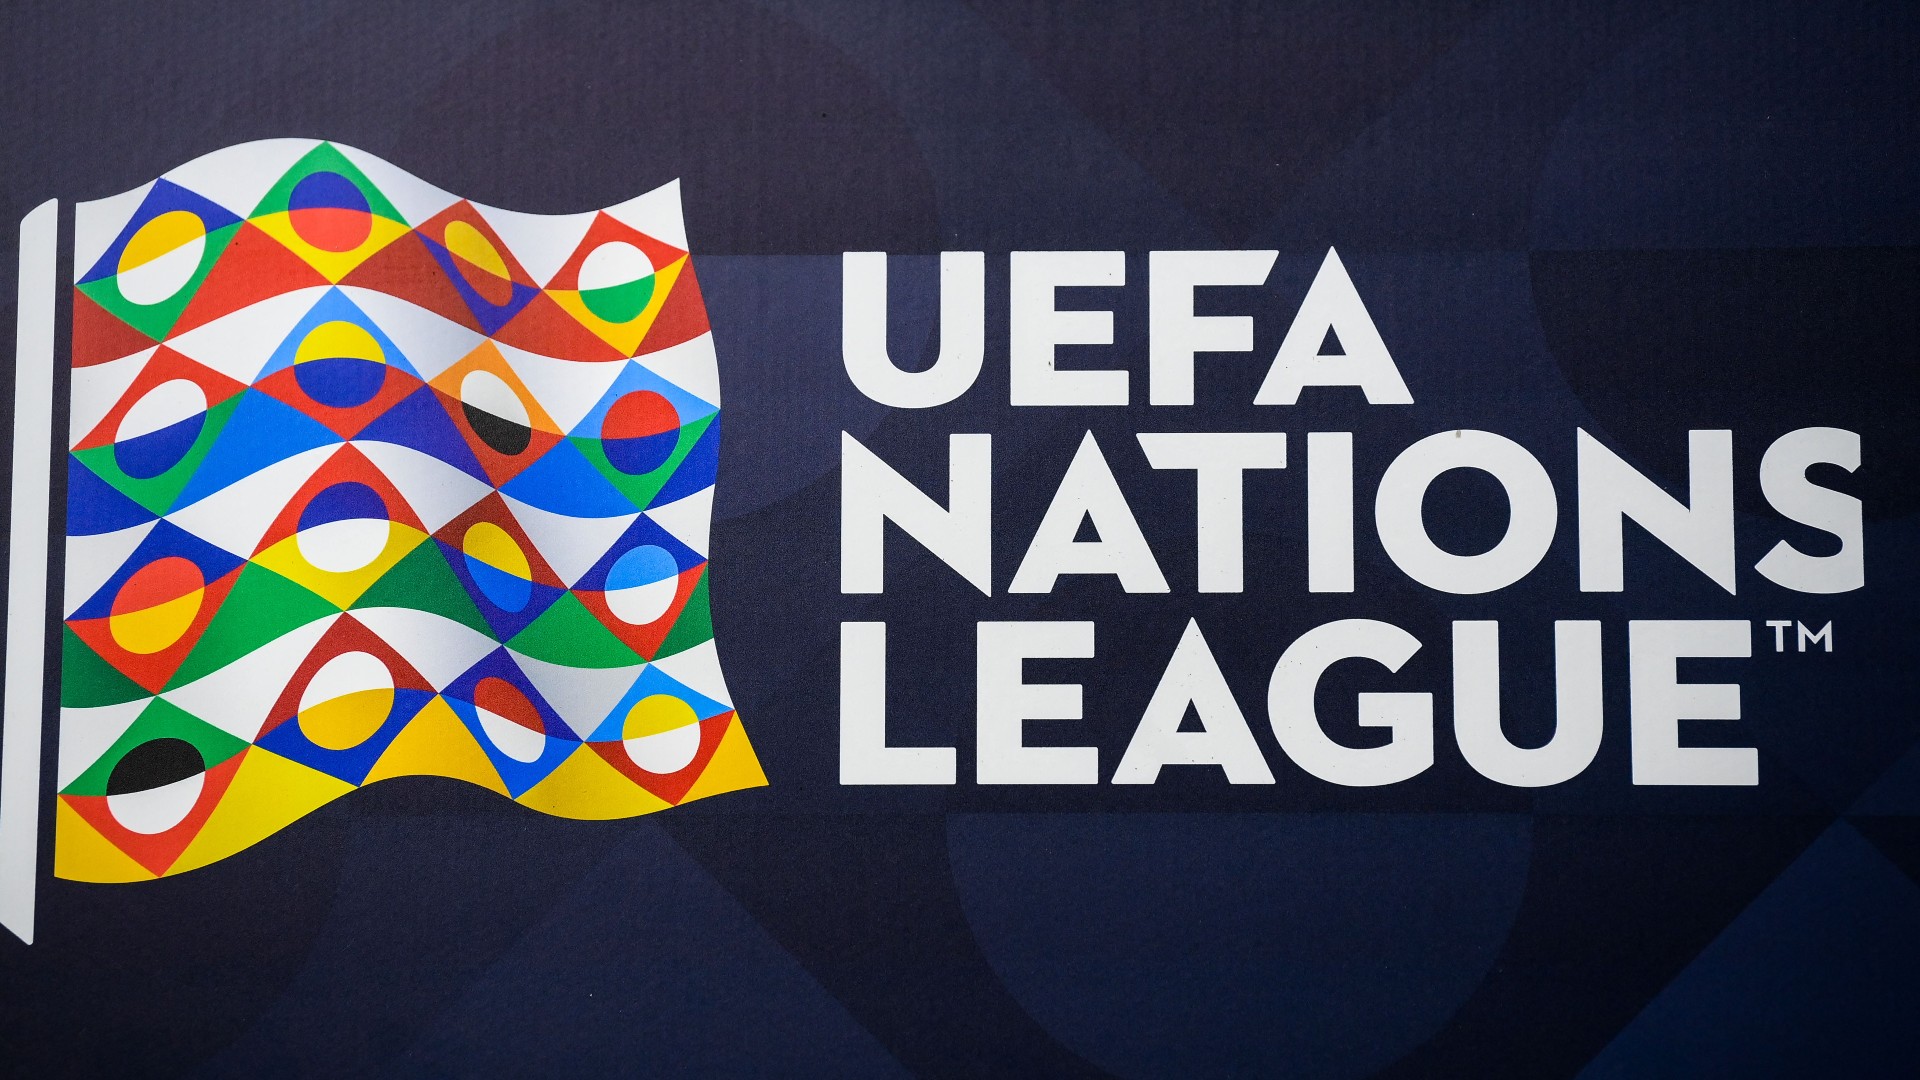 UEFA Nations League 2021 Semis & Finals: Schedule, TV, streaming, rosters, prize money, rules